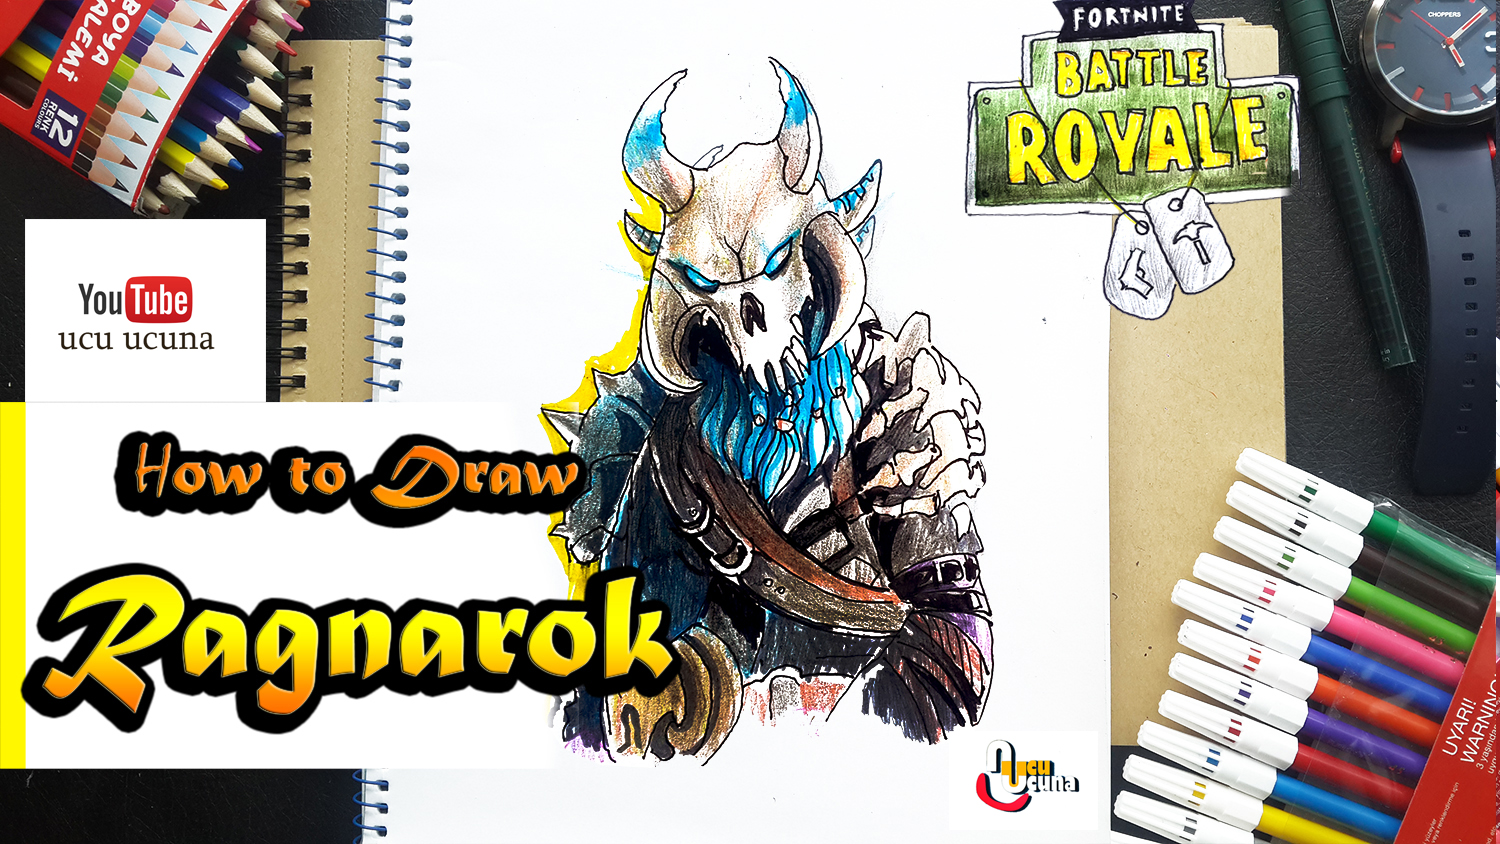 How to draw drift tutorial youtube channel name is ucu ucuna learn how to draw ragnarok fully upragaded from fortnite step by step beginner drawing tutorial of the ragnarok skin from fortnite